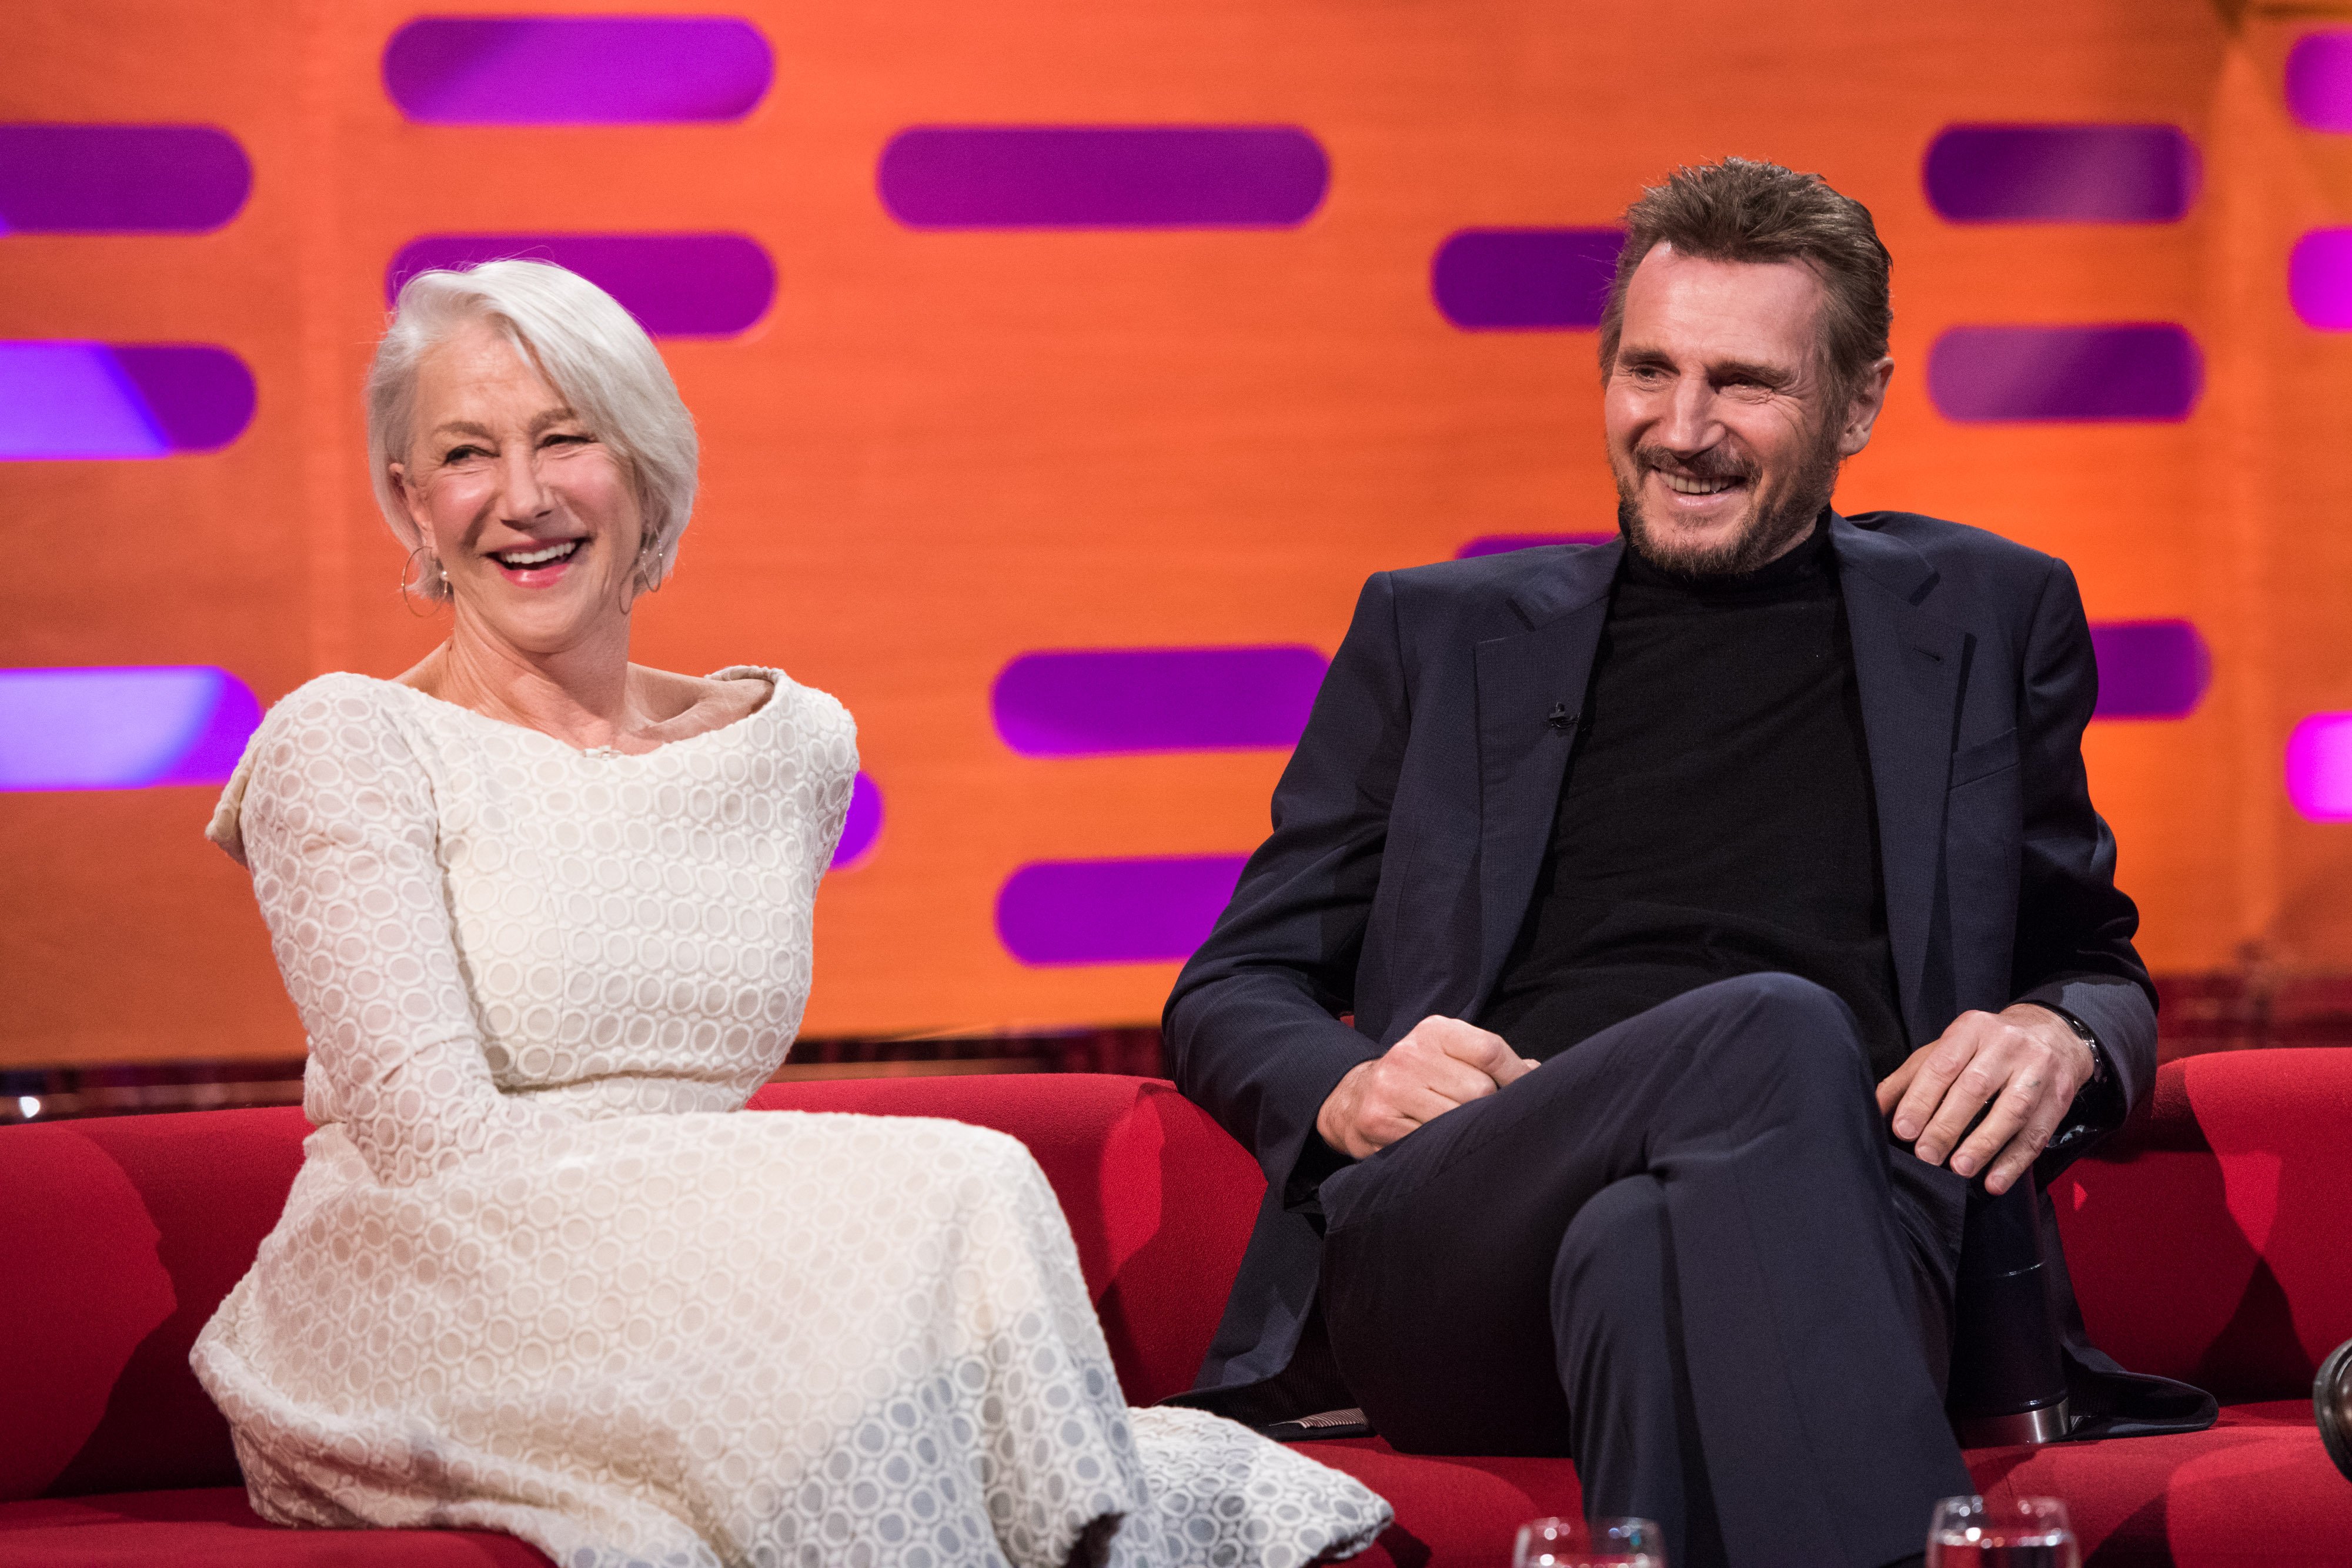  Helen Mirren and Liam Neeson, during the filming of the Graham Norton Show at The London Studios, south London in 2018. | Source: Getty Images